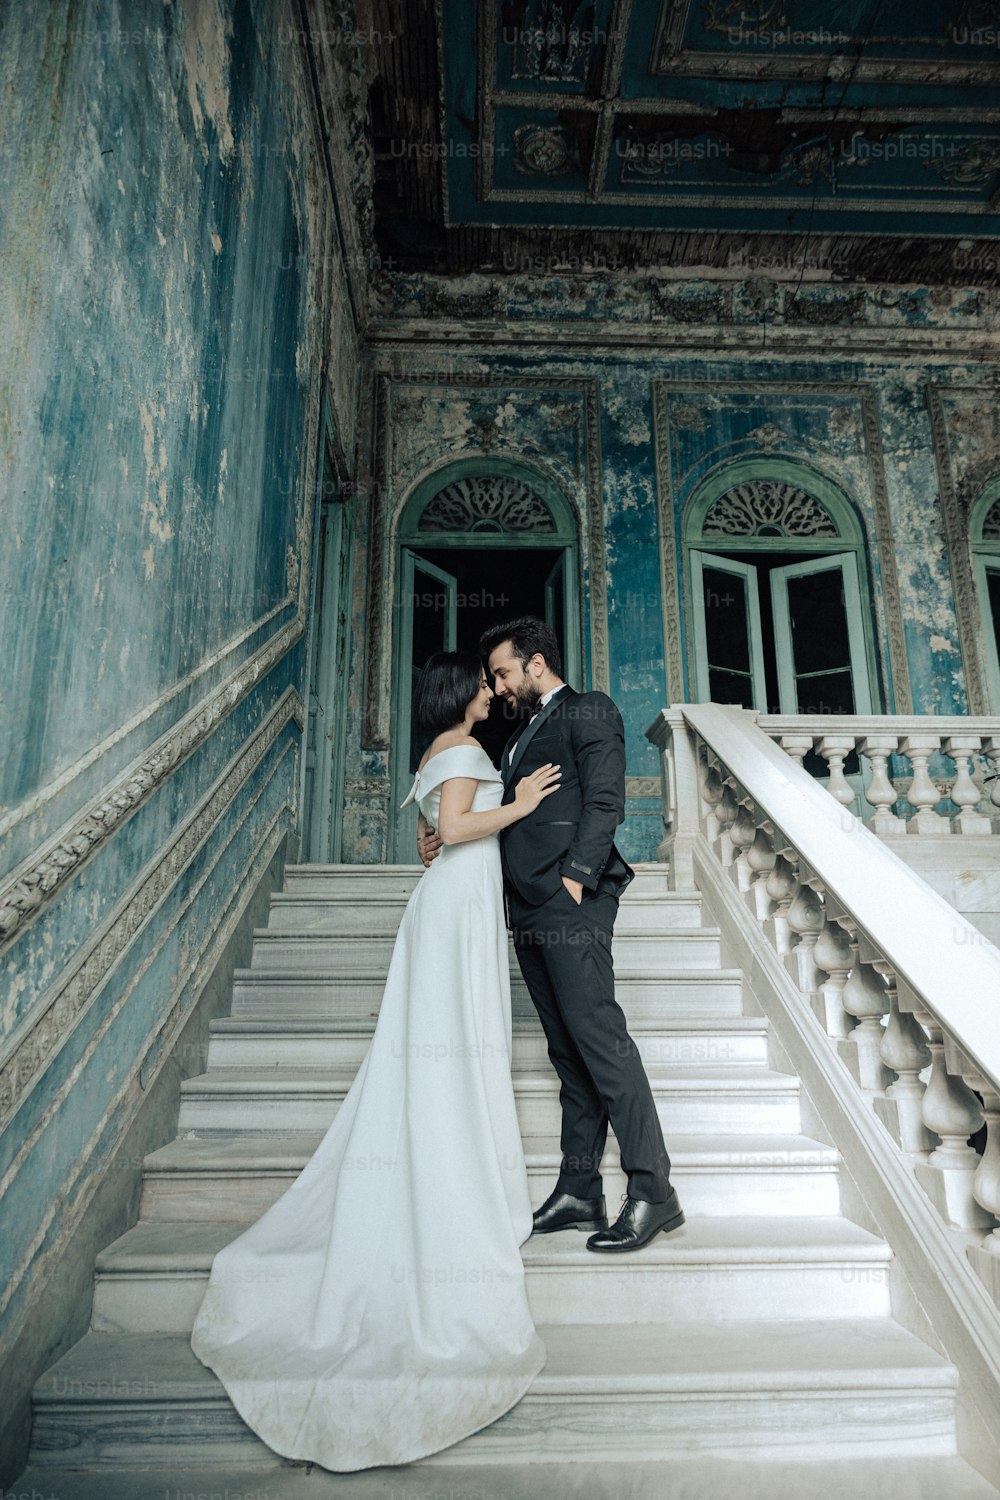 a bride and groom kissing on the steps of a building